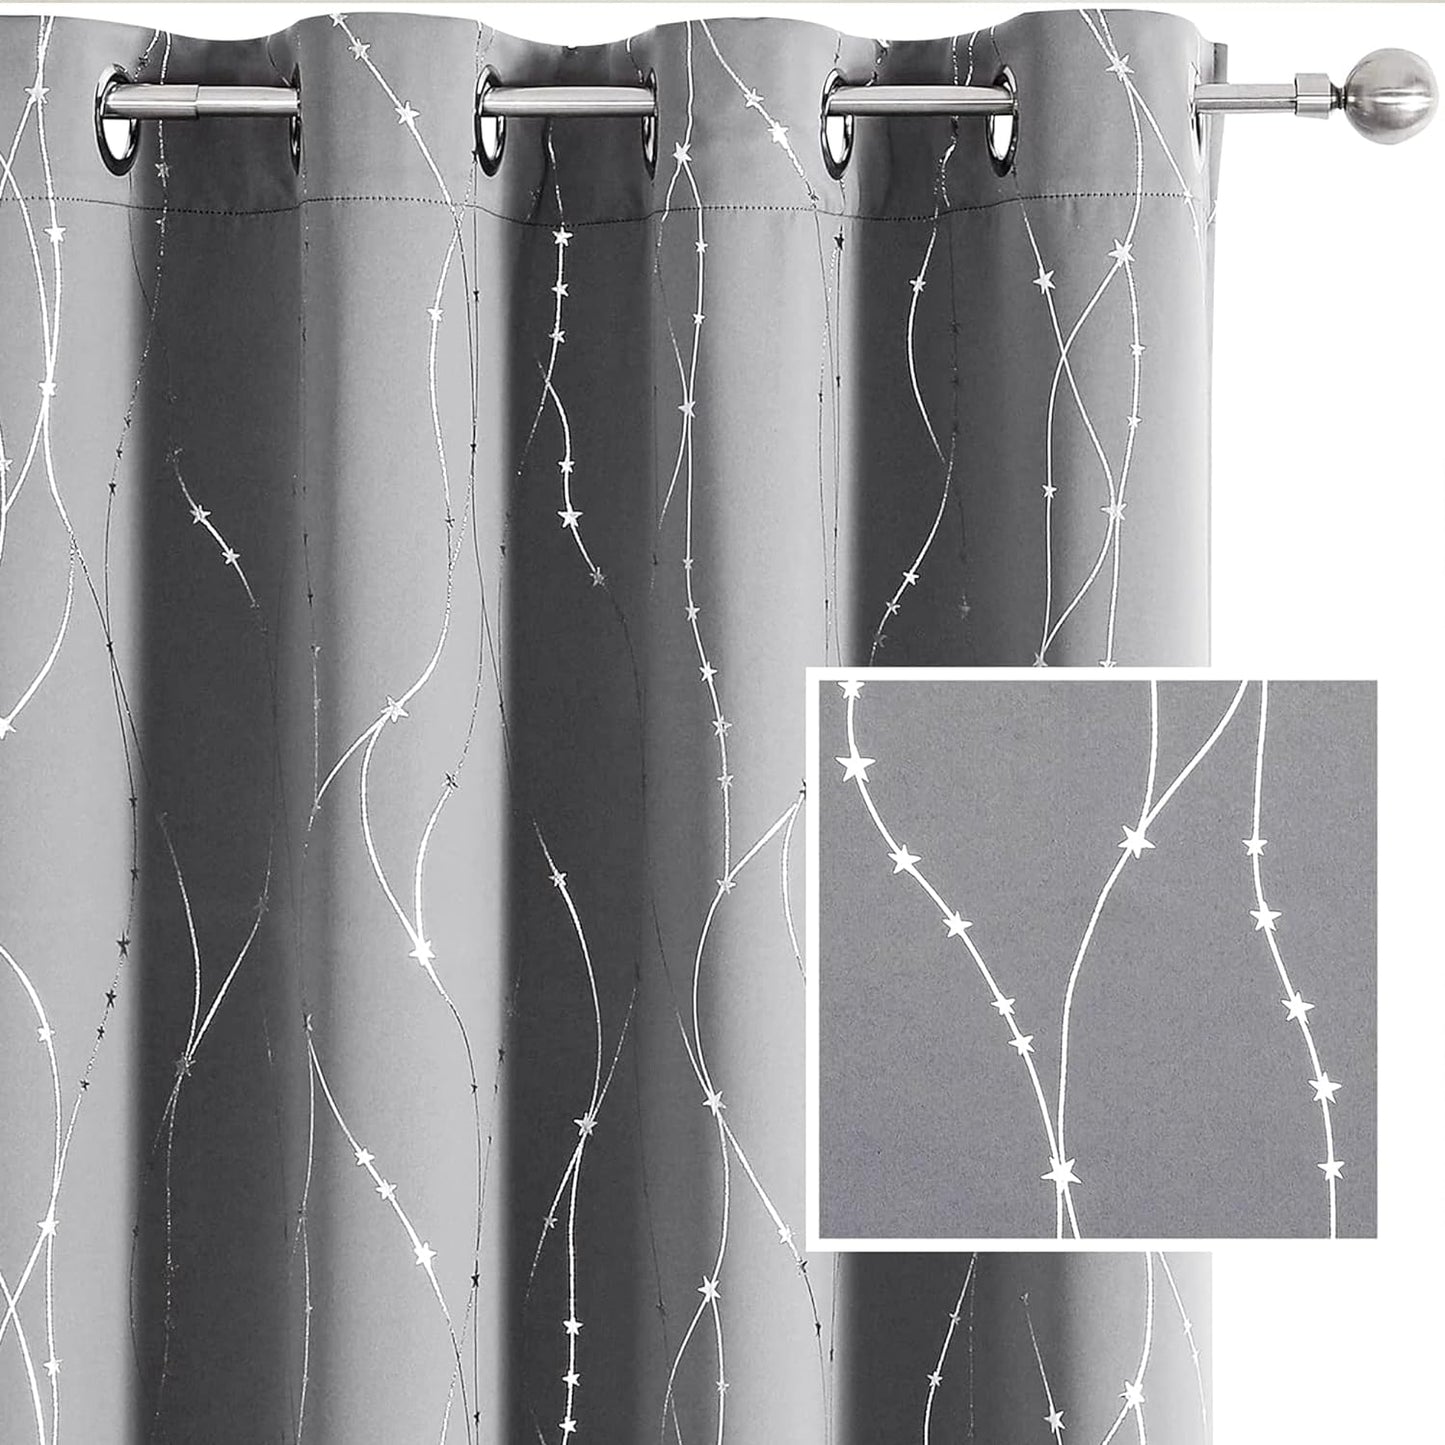 SMILE WEAVER Black Blackout Curtains for Bedroom 72 Inch Long 2 Panels,Room Darkening Curtain with Gold Print Design Noise Reducing Thermal Insulated Window Treatment Drapes for Living Room  SMILE WEAVER Light Grey Silver 52Wx63L 